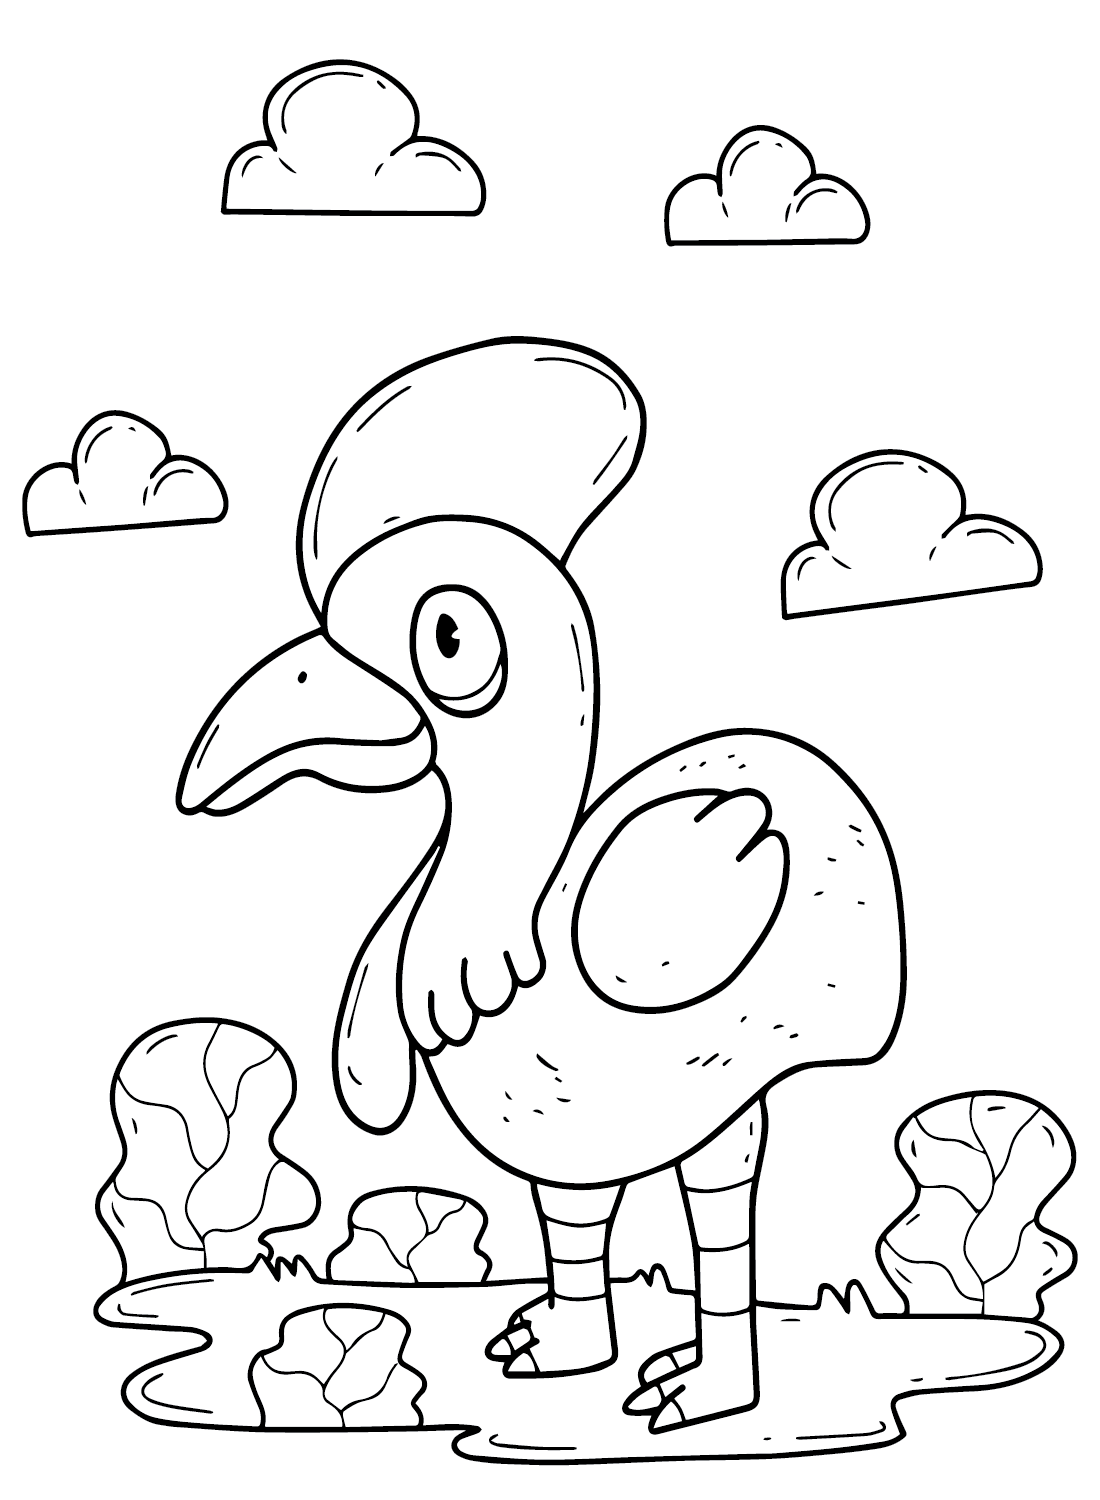 Cartoon Cassowary Coloring Page from Cassowary